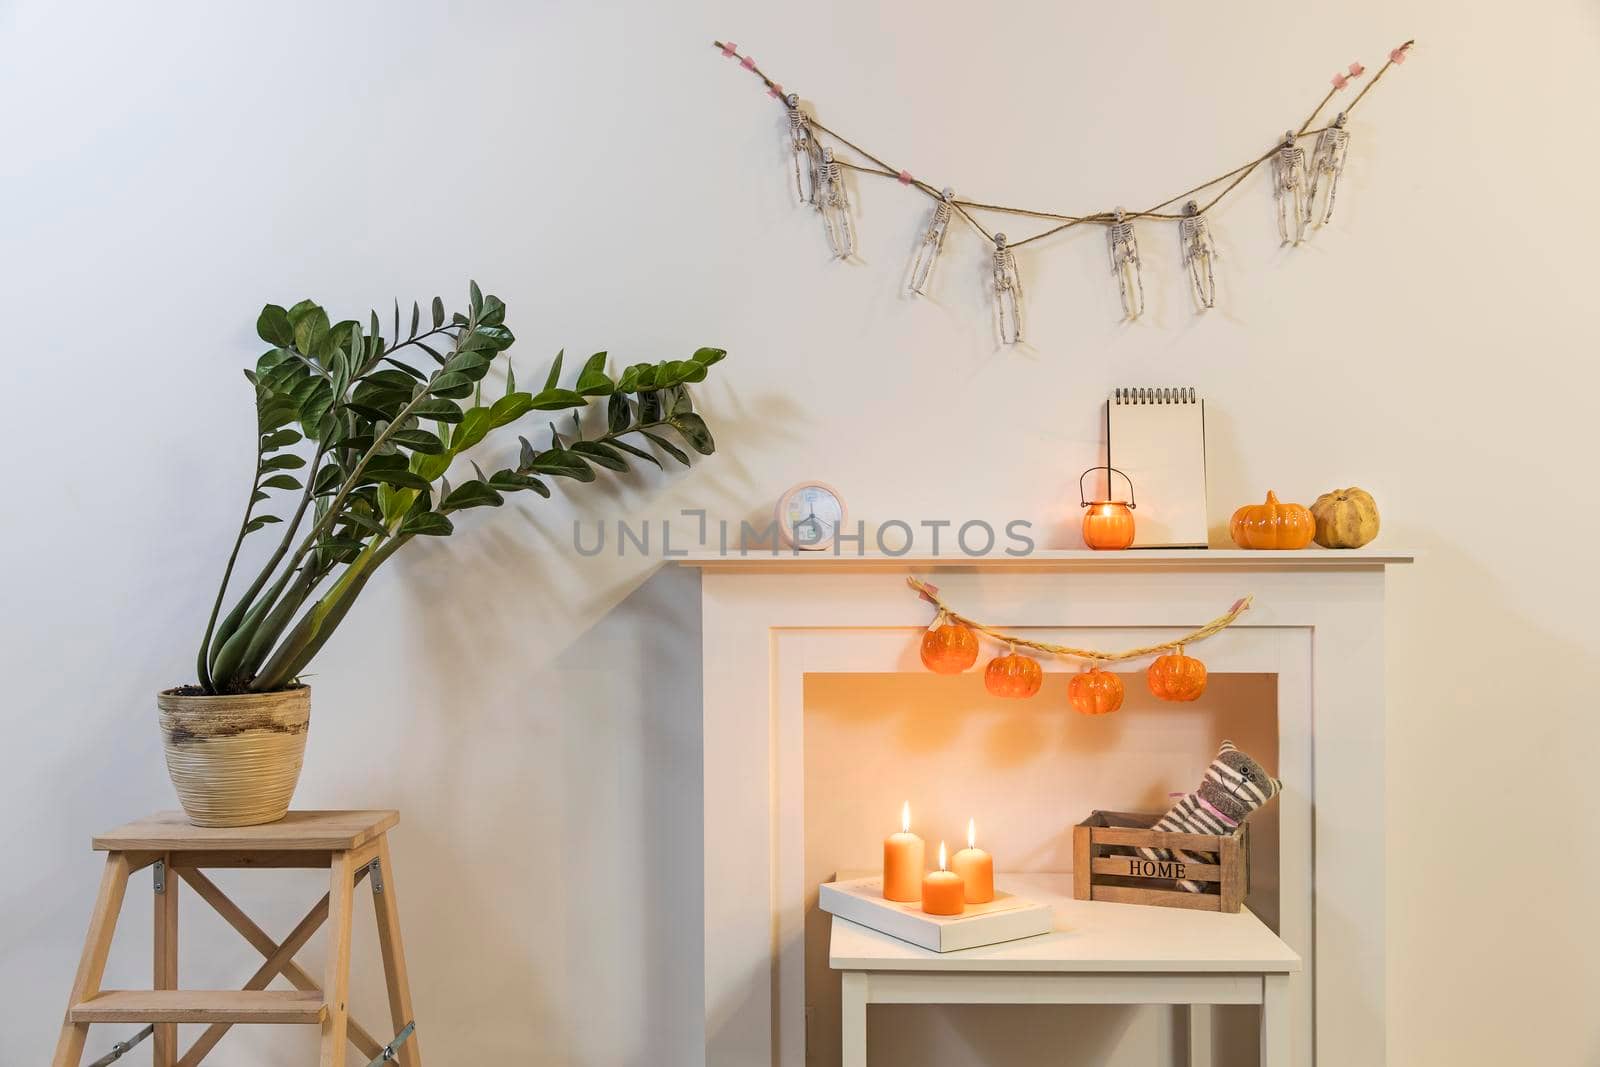 Frame with sign "Happy Halloween". Zamioculcas plant in clay pot on stool. Garland of skeletons hangs on wall. Garland of plastic pumpkins hangs from fireplace. Interior is decorated for Halloween. by elenarostunova